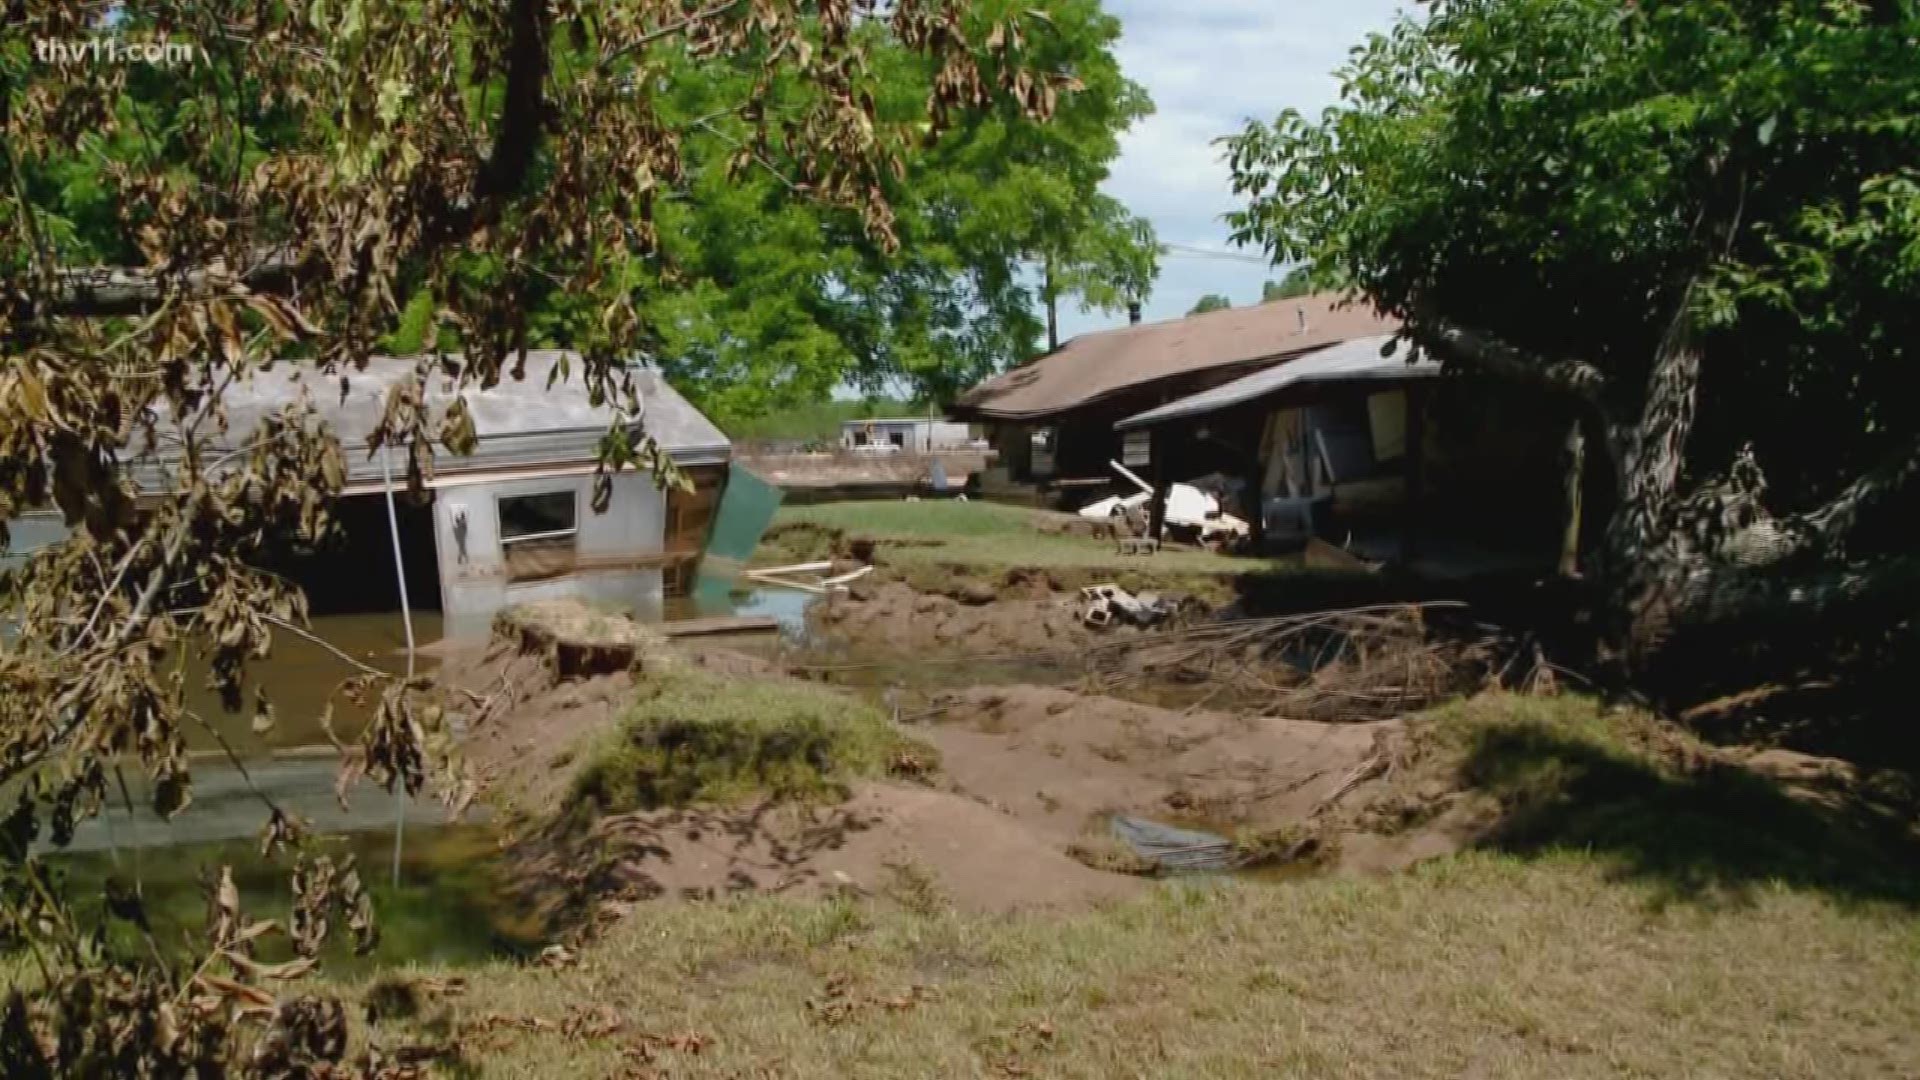 Things are starting to get back to normal in the Toad Suck area but there's a lot of damage. THV11 Photojournalist Sam Belk shows us some remarkable images of during and after the flood.